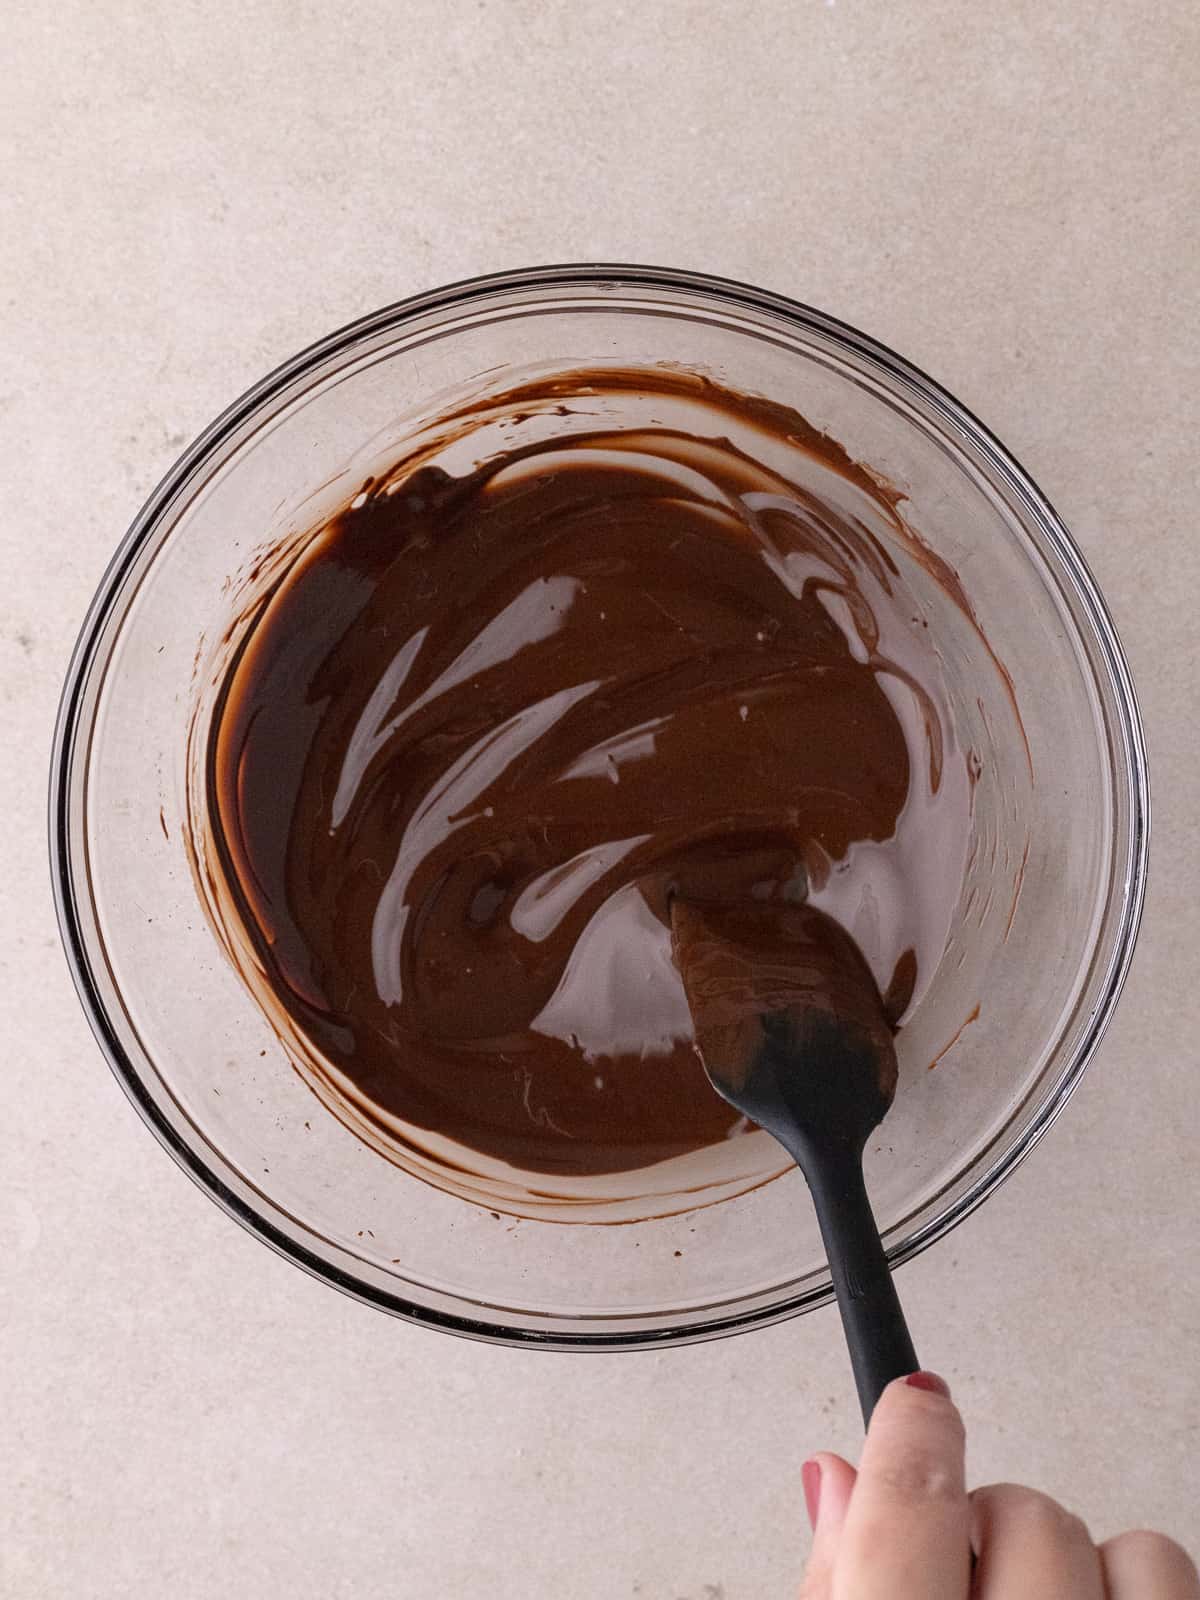 A small bowl of melted chocolate.